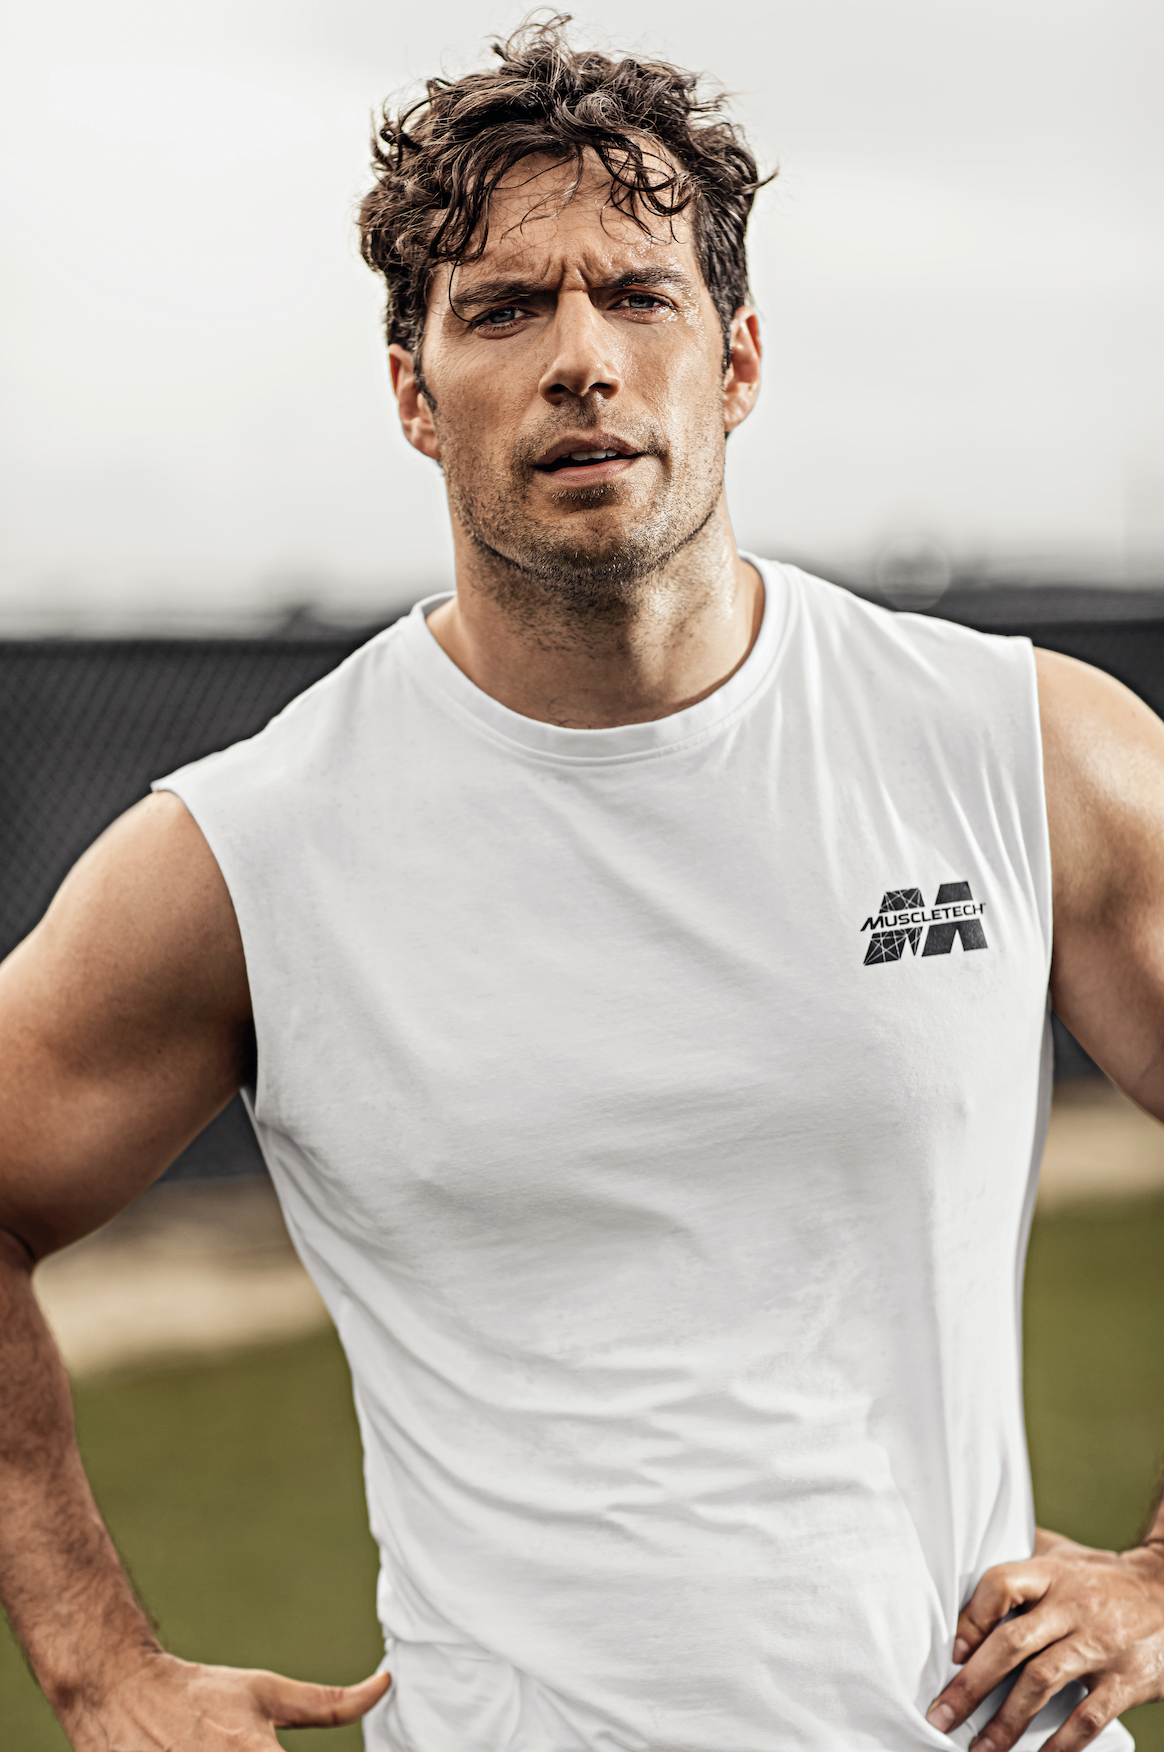 The new “Strength Redefined” campaign from MuscleTech®, launching on September 22, is Henry Cavill's first as the brand's Chief Creative Director. 

The “Strength Redefined” campaign connects Cavill’s famed ability to sculpt and craft his physique for screens large and small with the accomplishments of everyday individuals, including our First Responders.